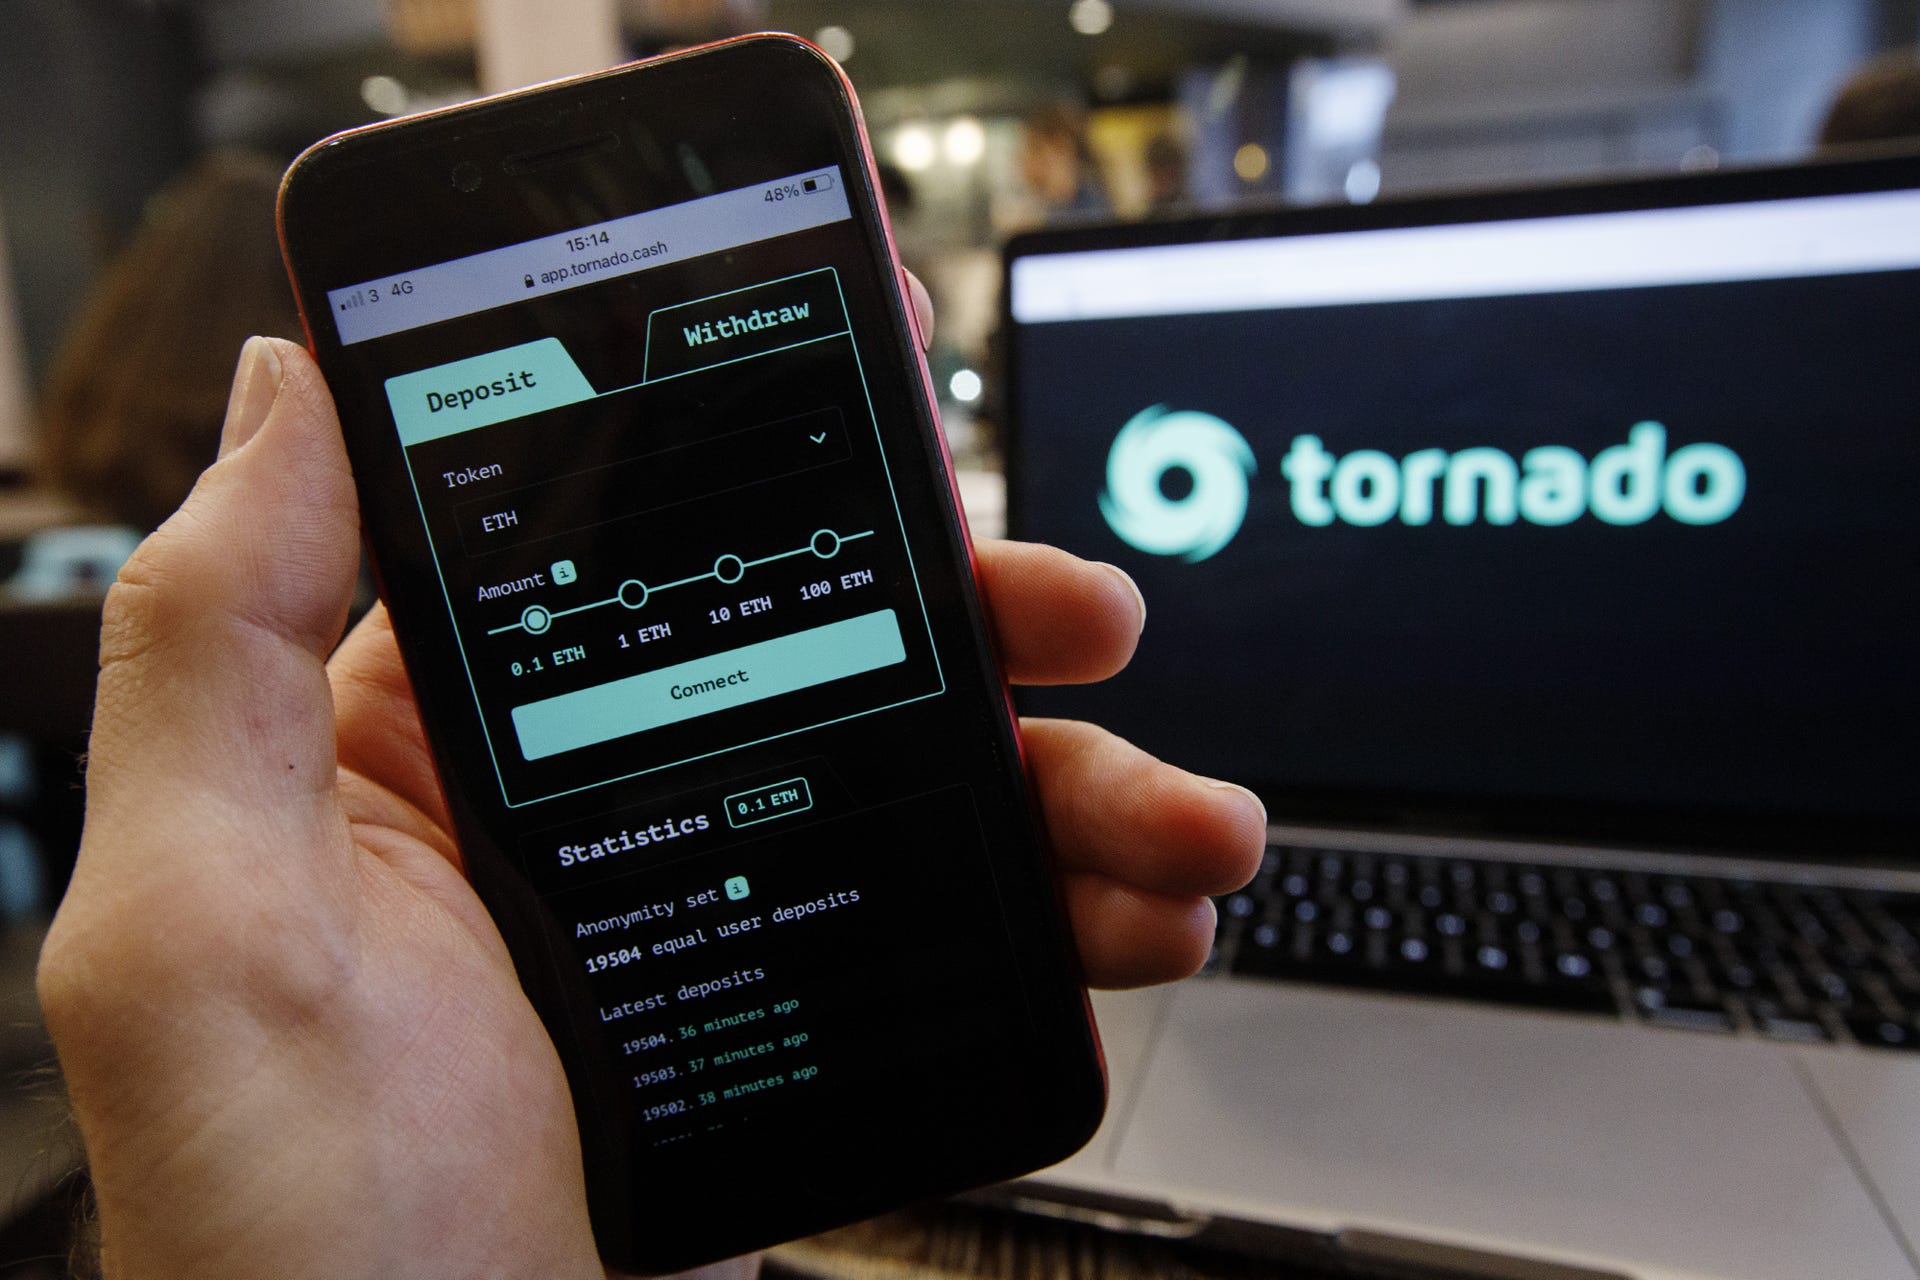 The Tornado Cash application on a phone, with the app's logo in the background.